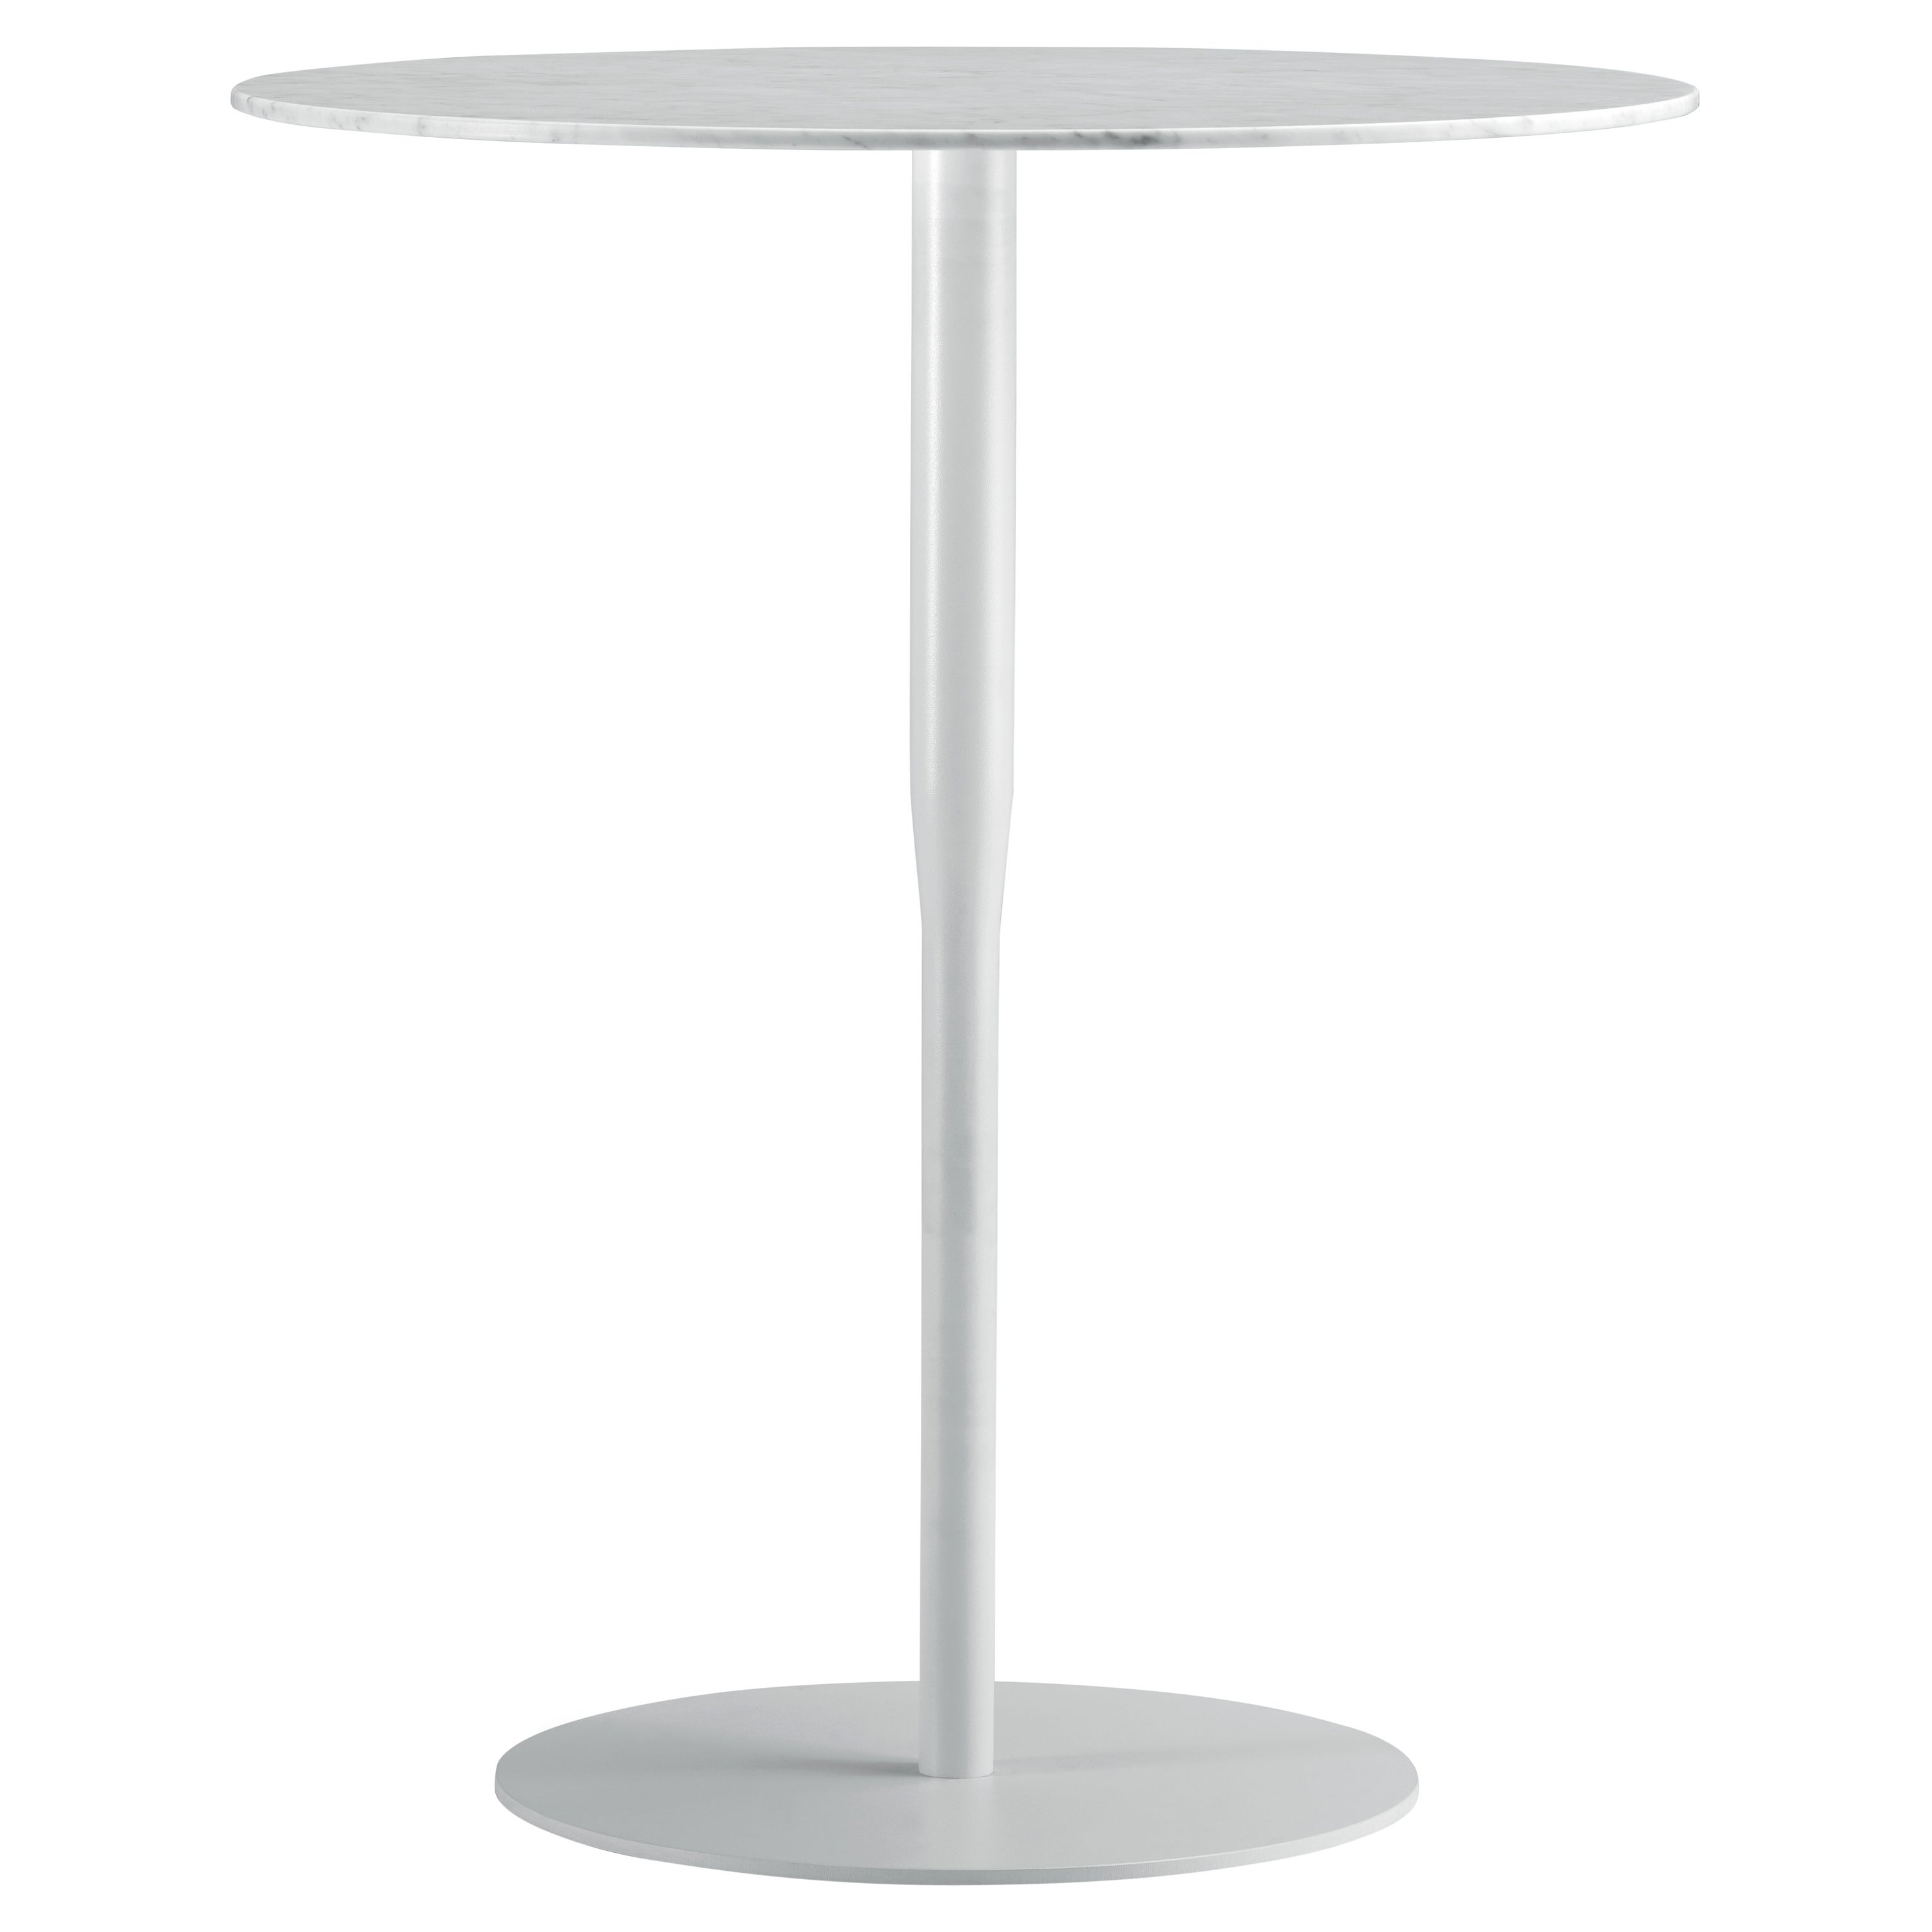 Alias Round Large Atlas Low Table H in Natural Maple Top & Lacquered Steel Frame